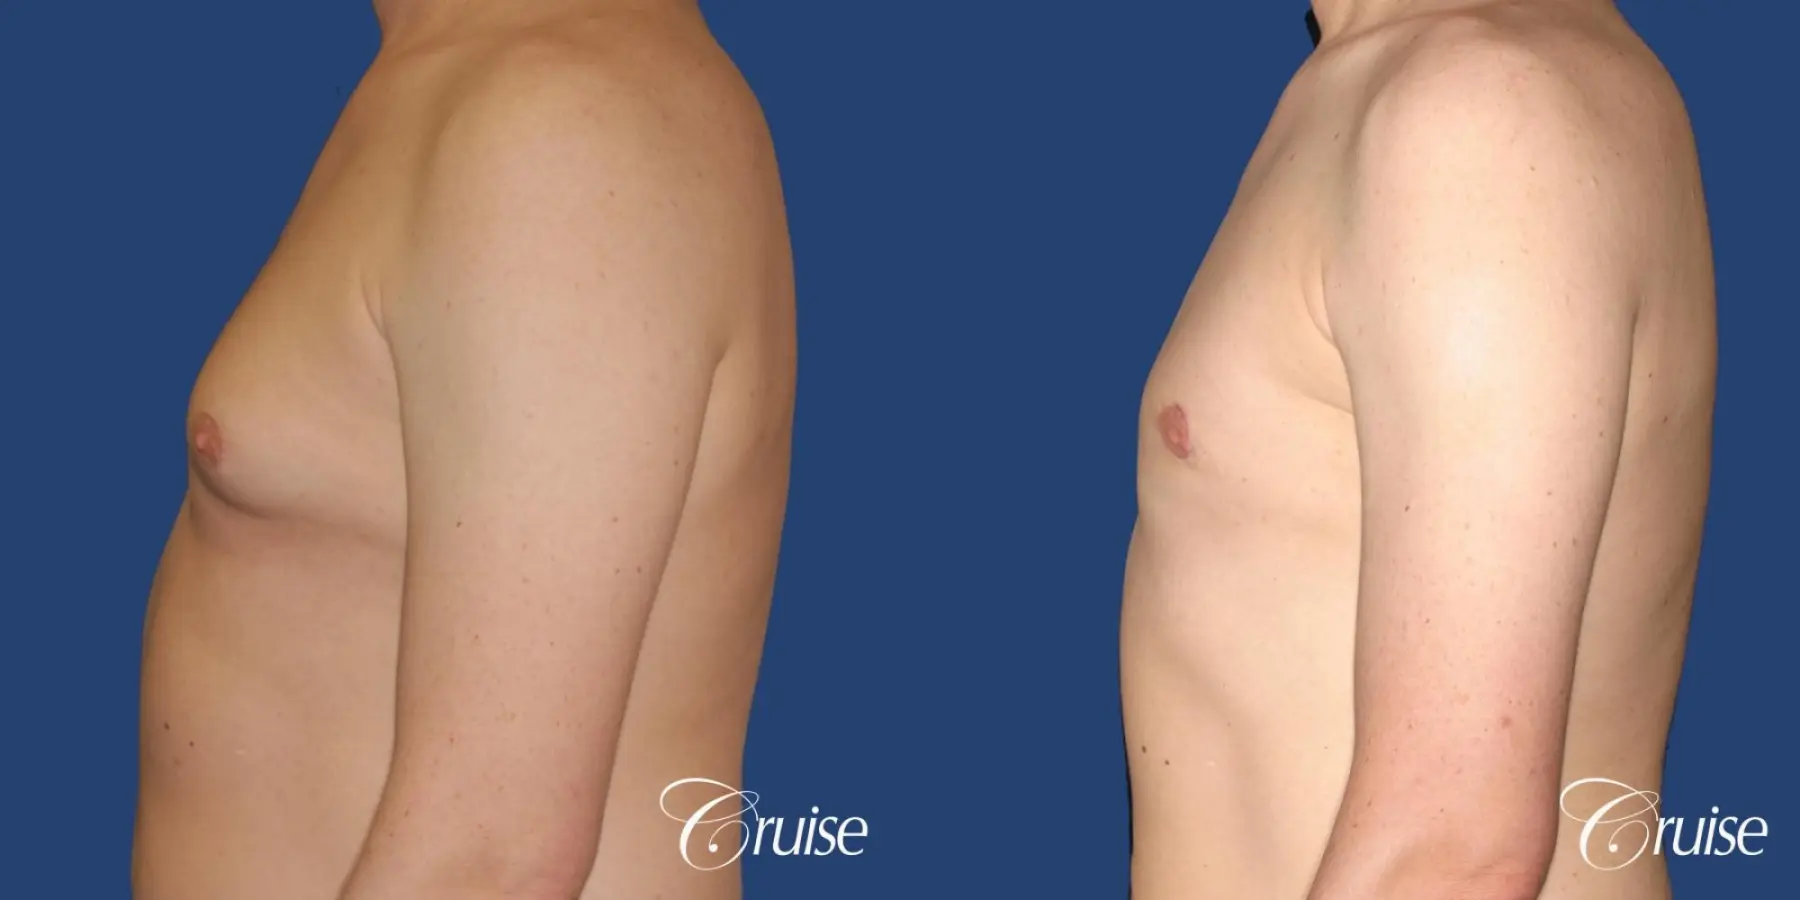 moderate gynecomastia on adult with donut lift scar - Before and After 2